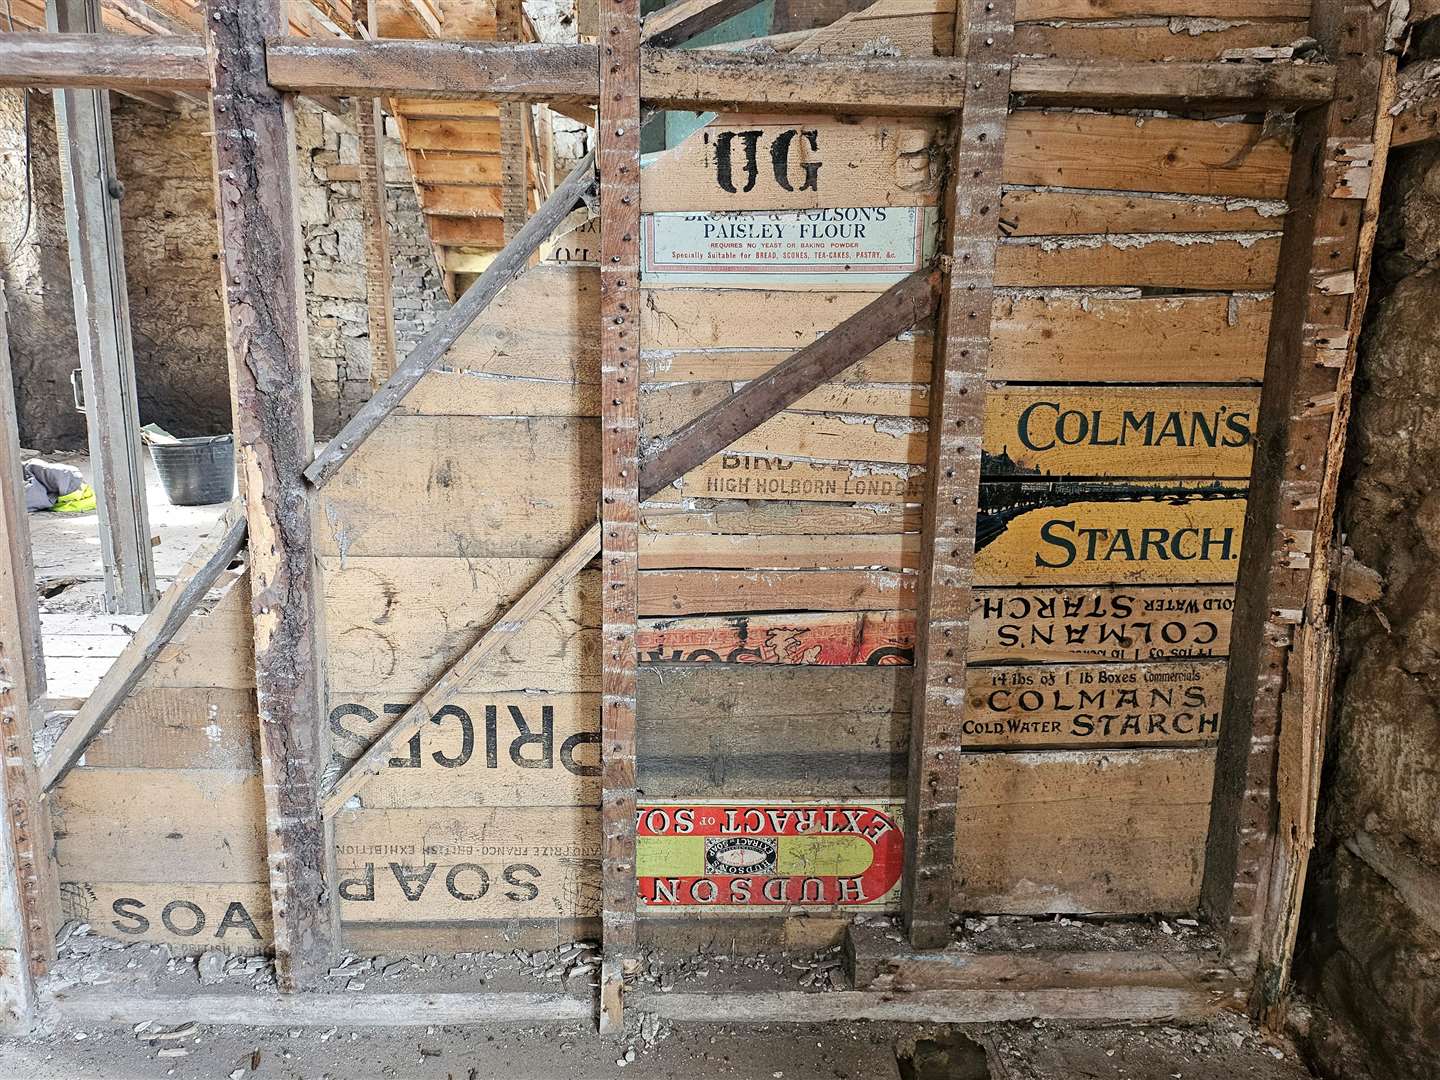 Wooden food cases were repurposed to build a staircase in 1903.